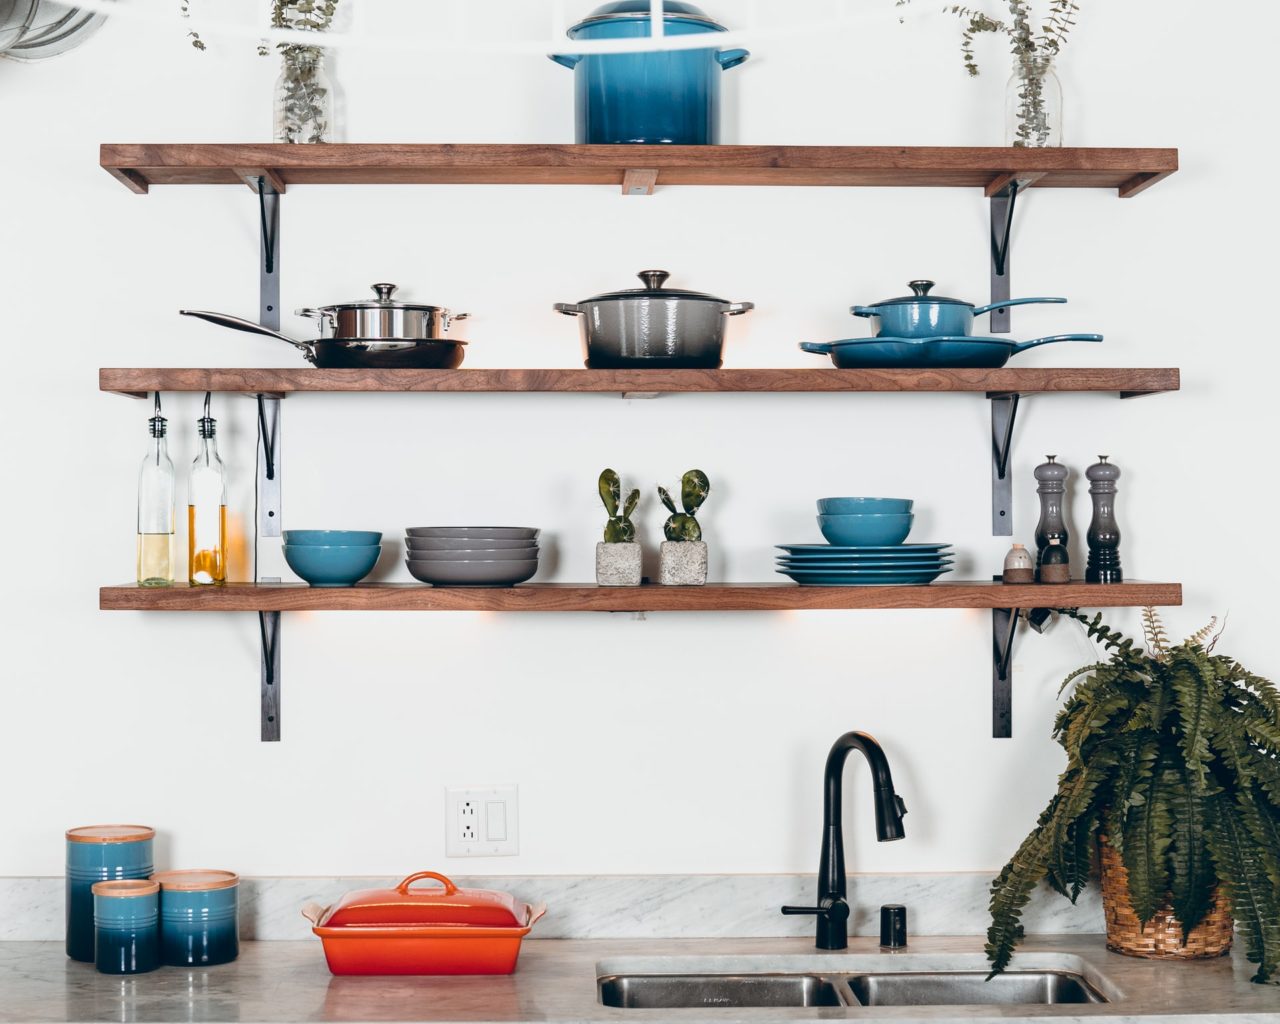 Stacked cookware on shelves